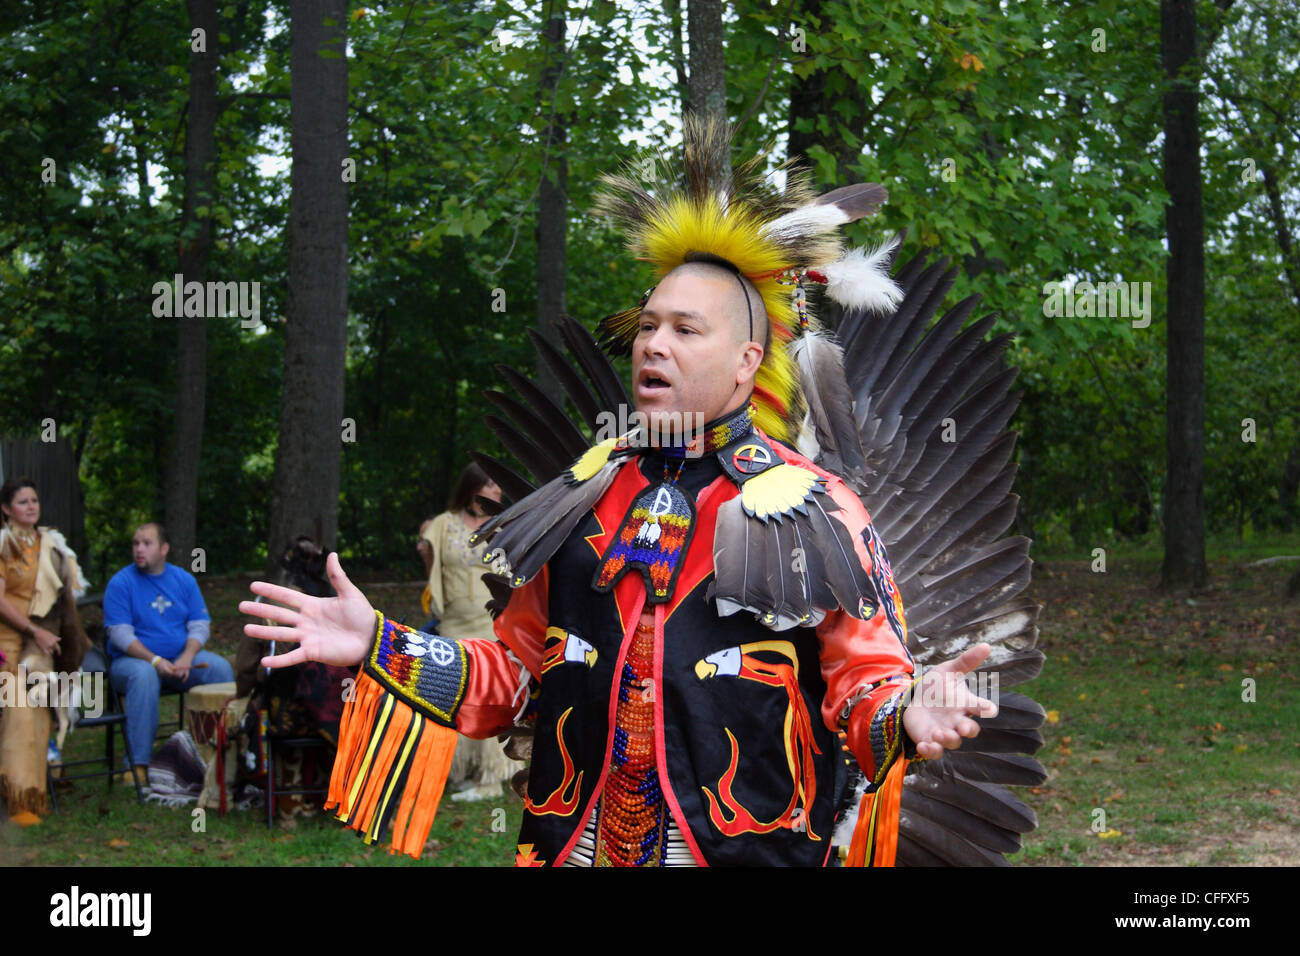 Native American man discusses the meaning of traditional dances in American Indian culture at Publick Days event in Chester, VA Stock Photo